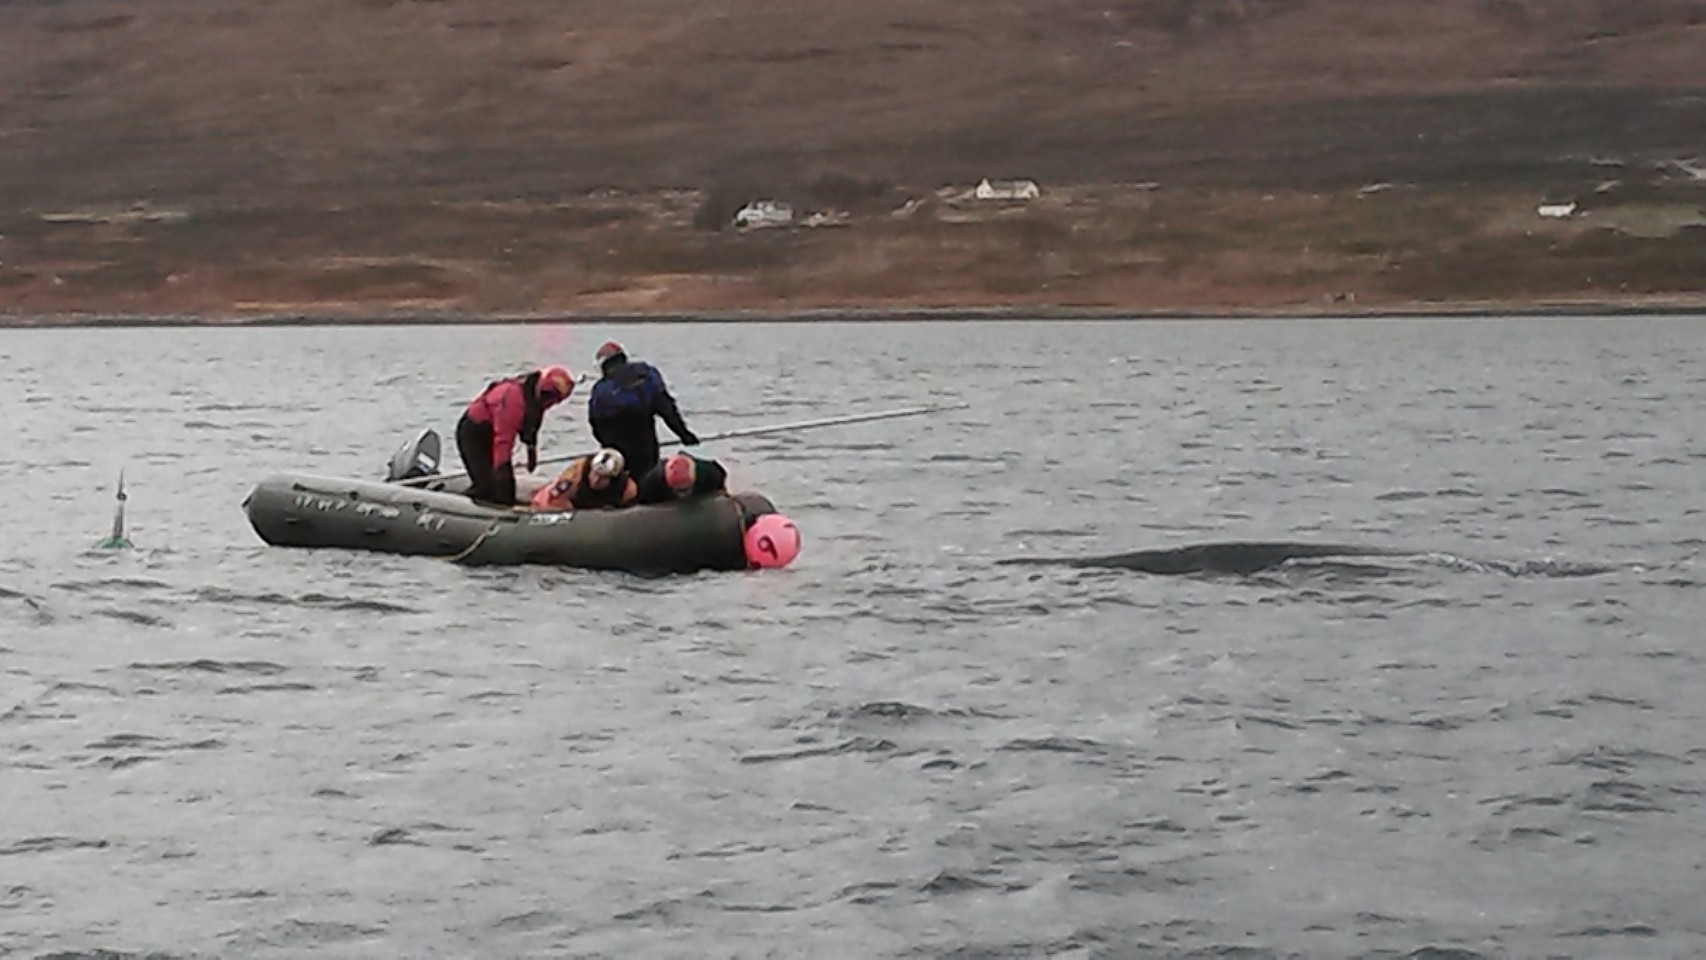 The rescue boat crew reach the whale. Picture by Laura Shirra